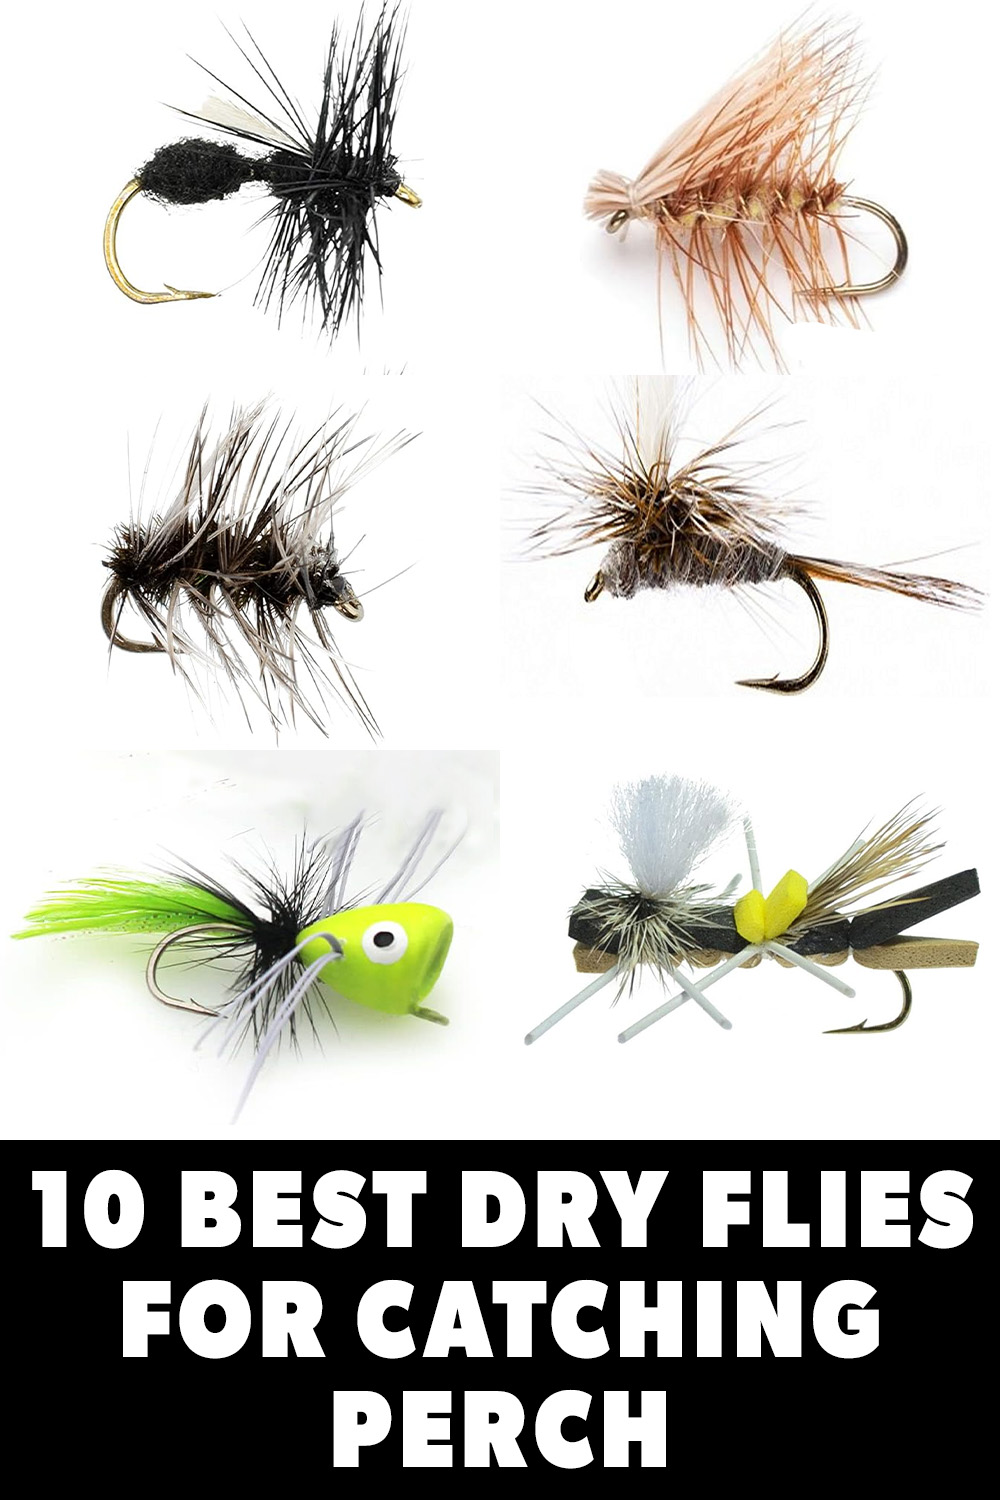 10 best dry flies for perch fishing